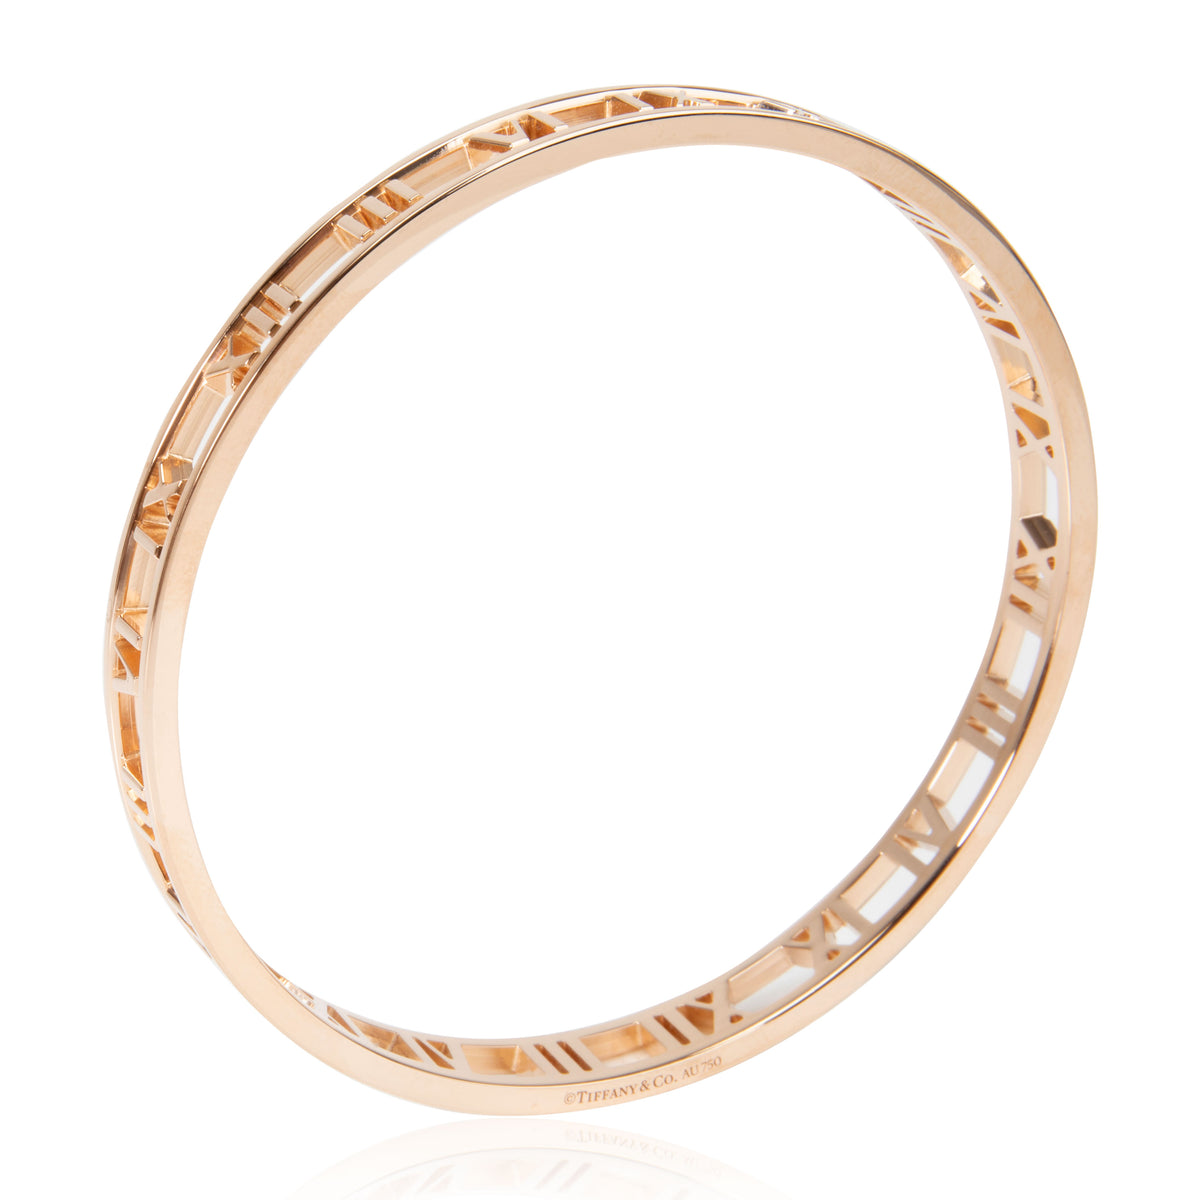 Tiffany & Co. Atlas Collection Bangle in 18K Rose Gold